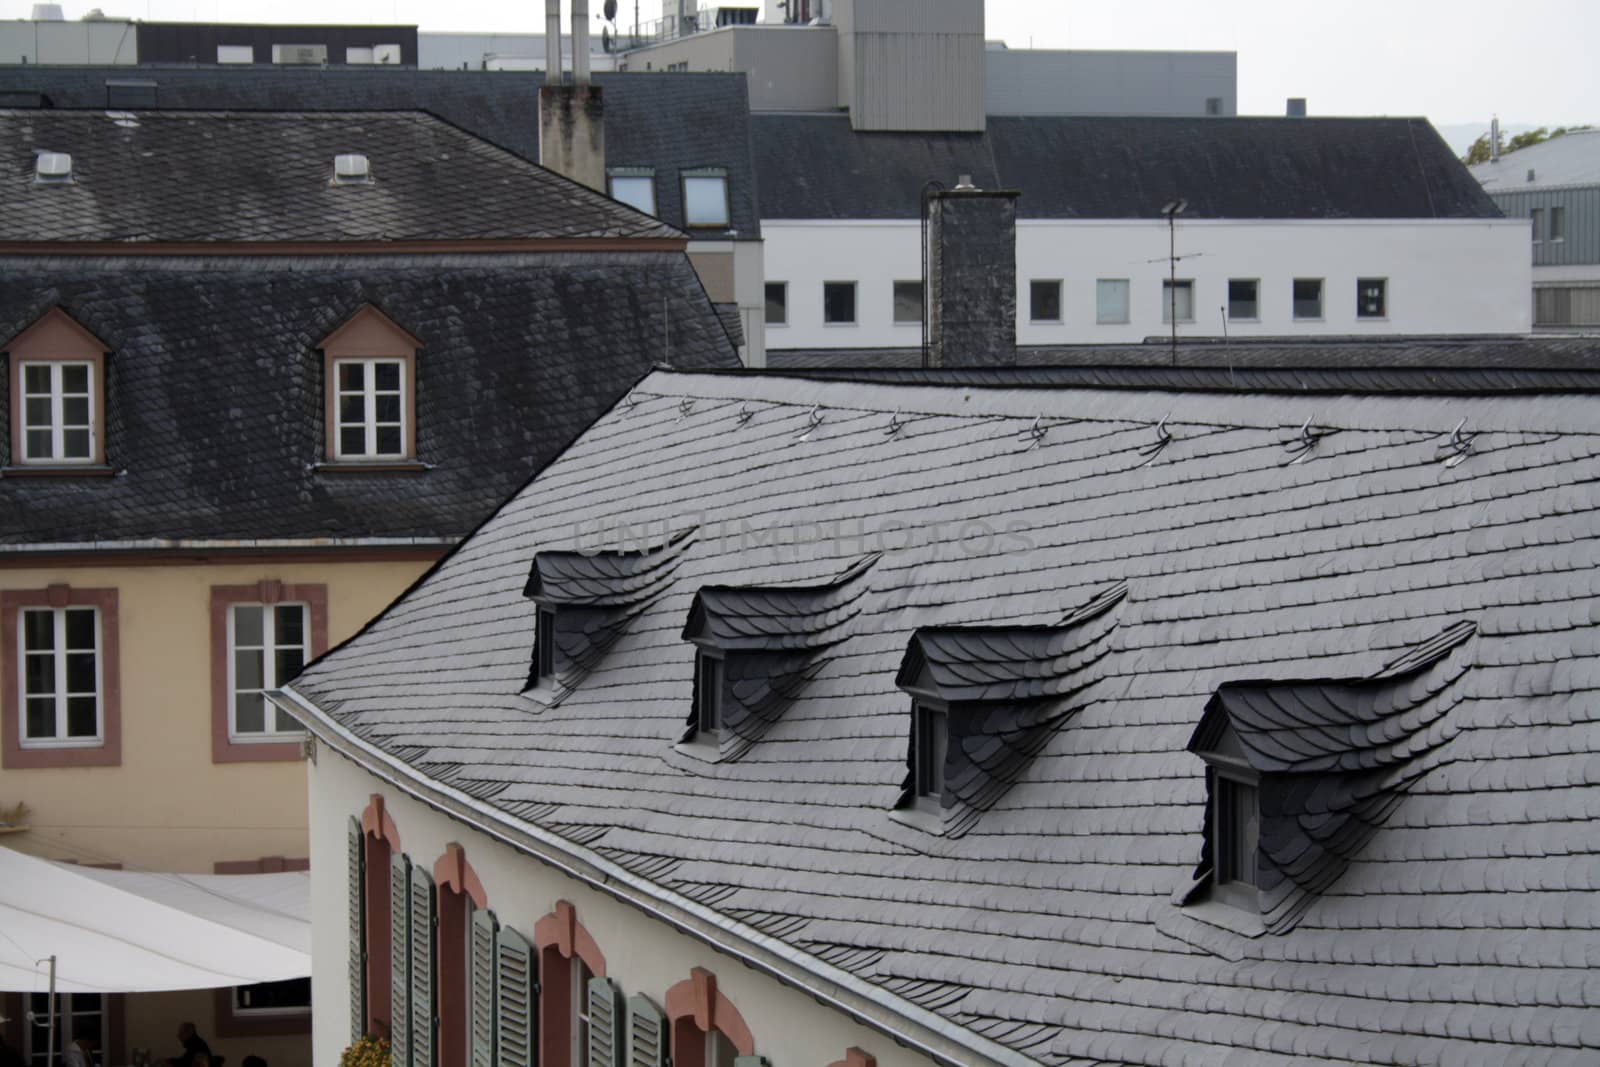 Slate roof by toneteam